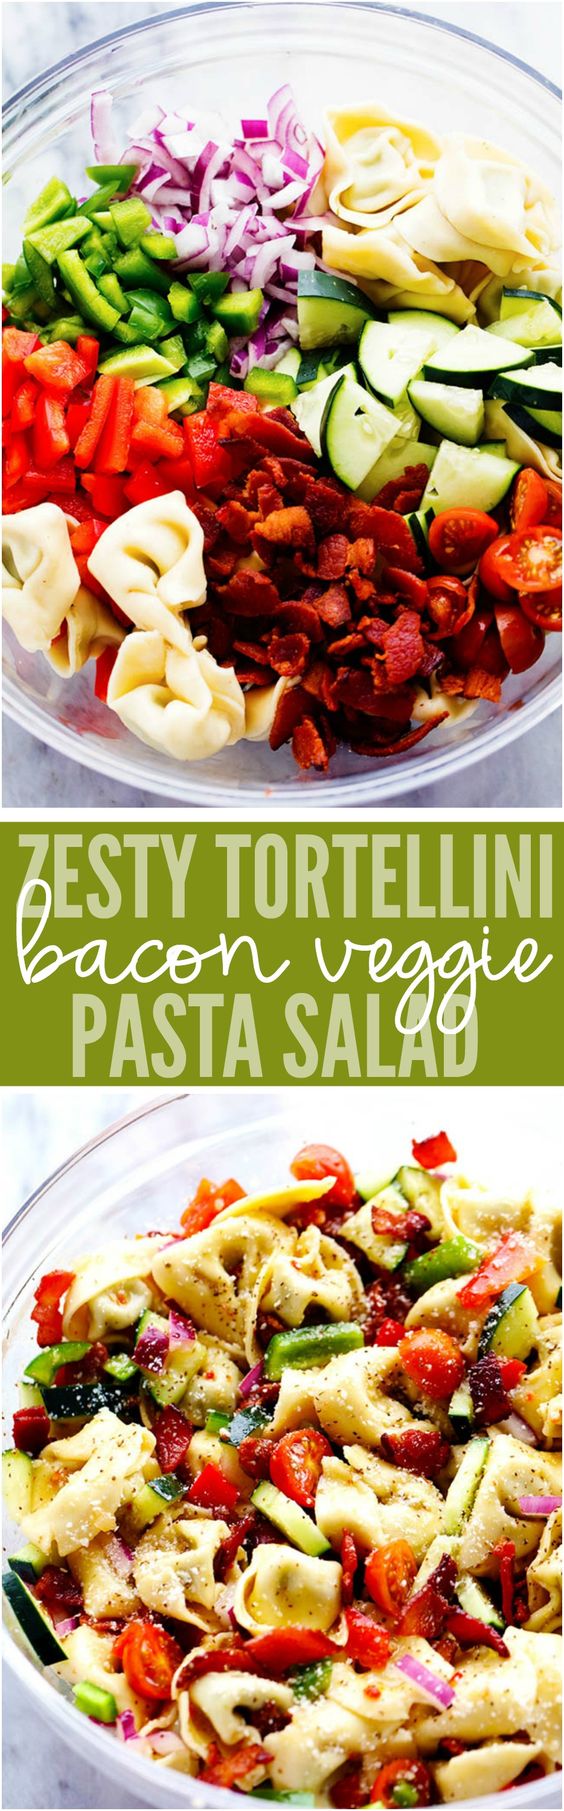 A zesty italian salad with tortellini, bacon and vegetables. This salad will be a huge hit wherever you take it!